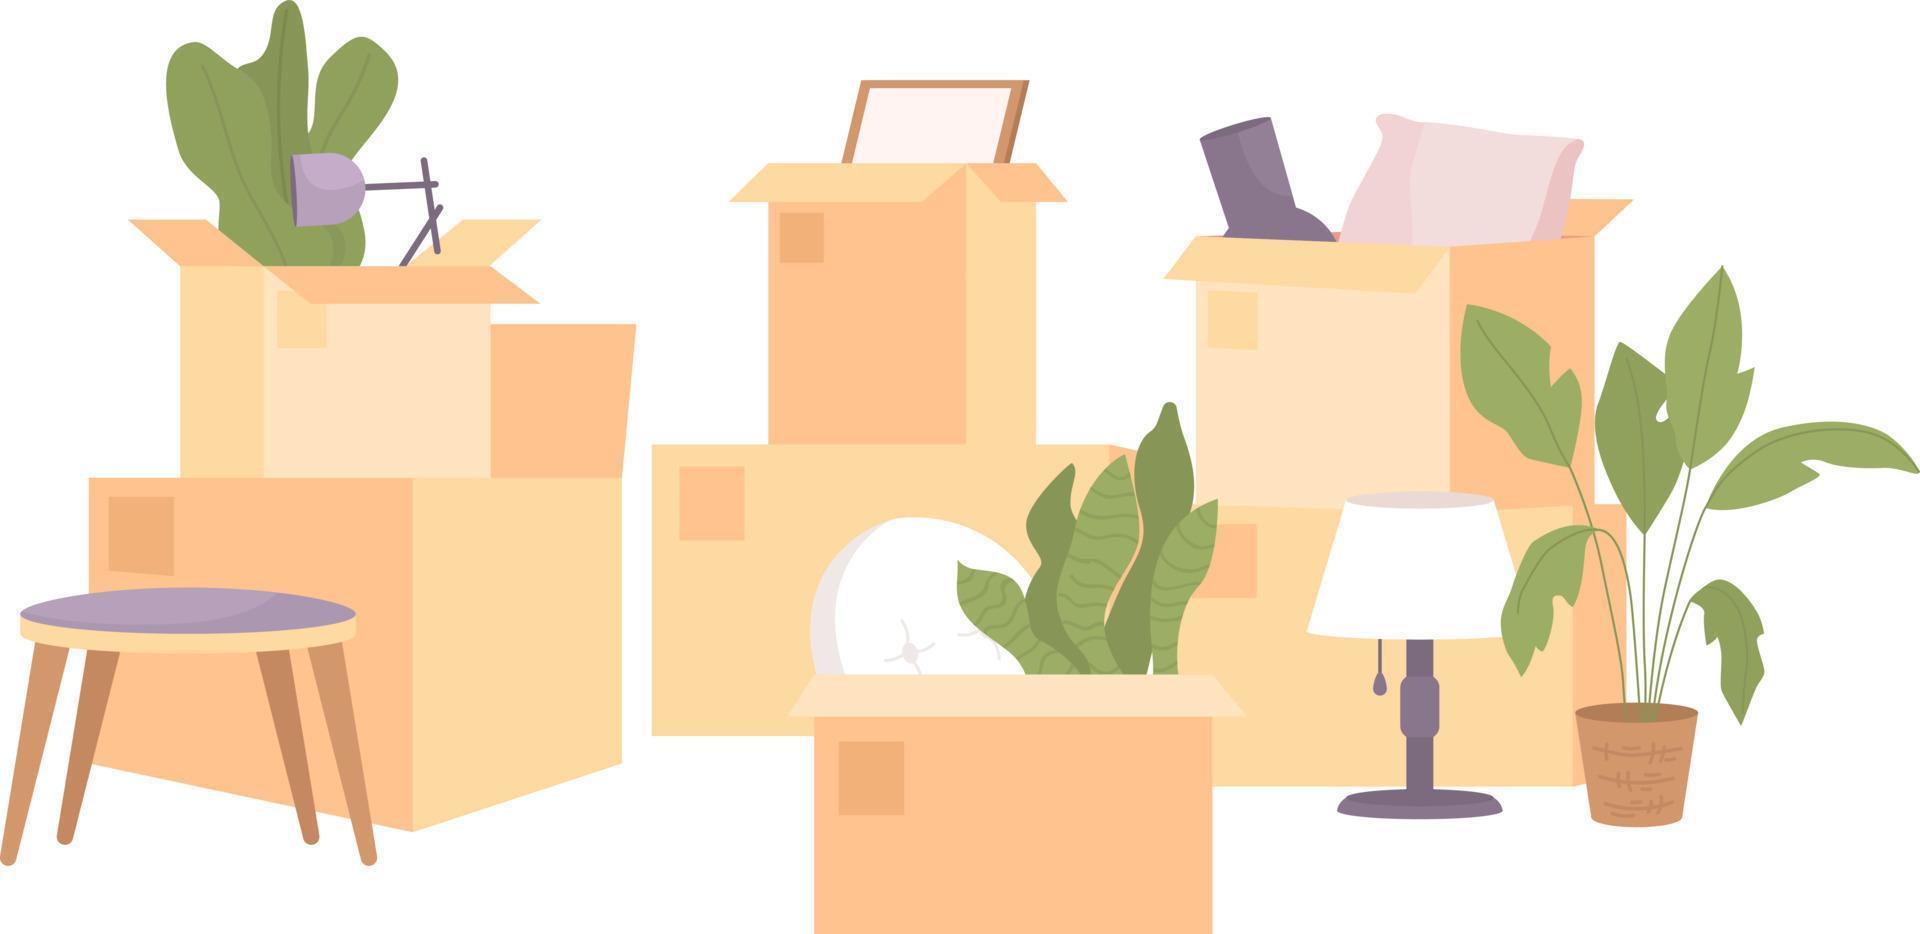 Messy pile of boxes with living room decor semi flat color vector objects